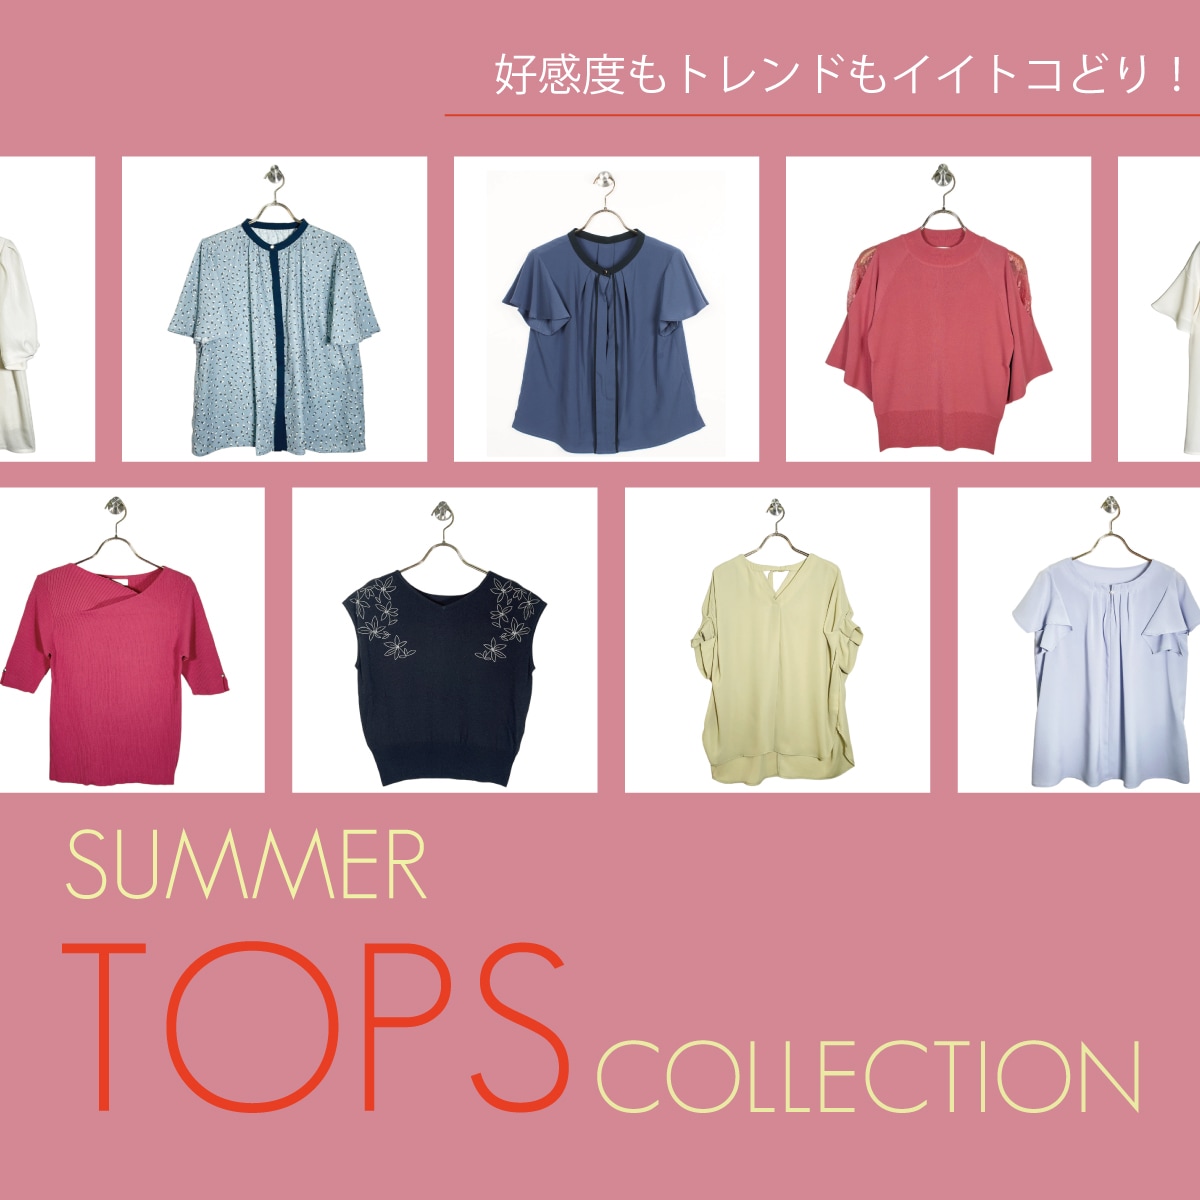 SUMMER TOPS COLLECTION